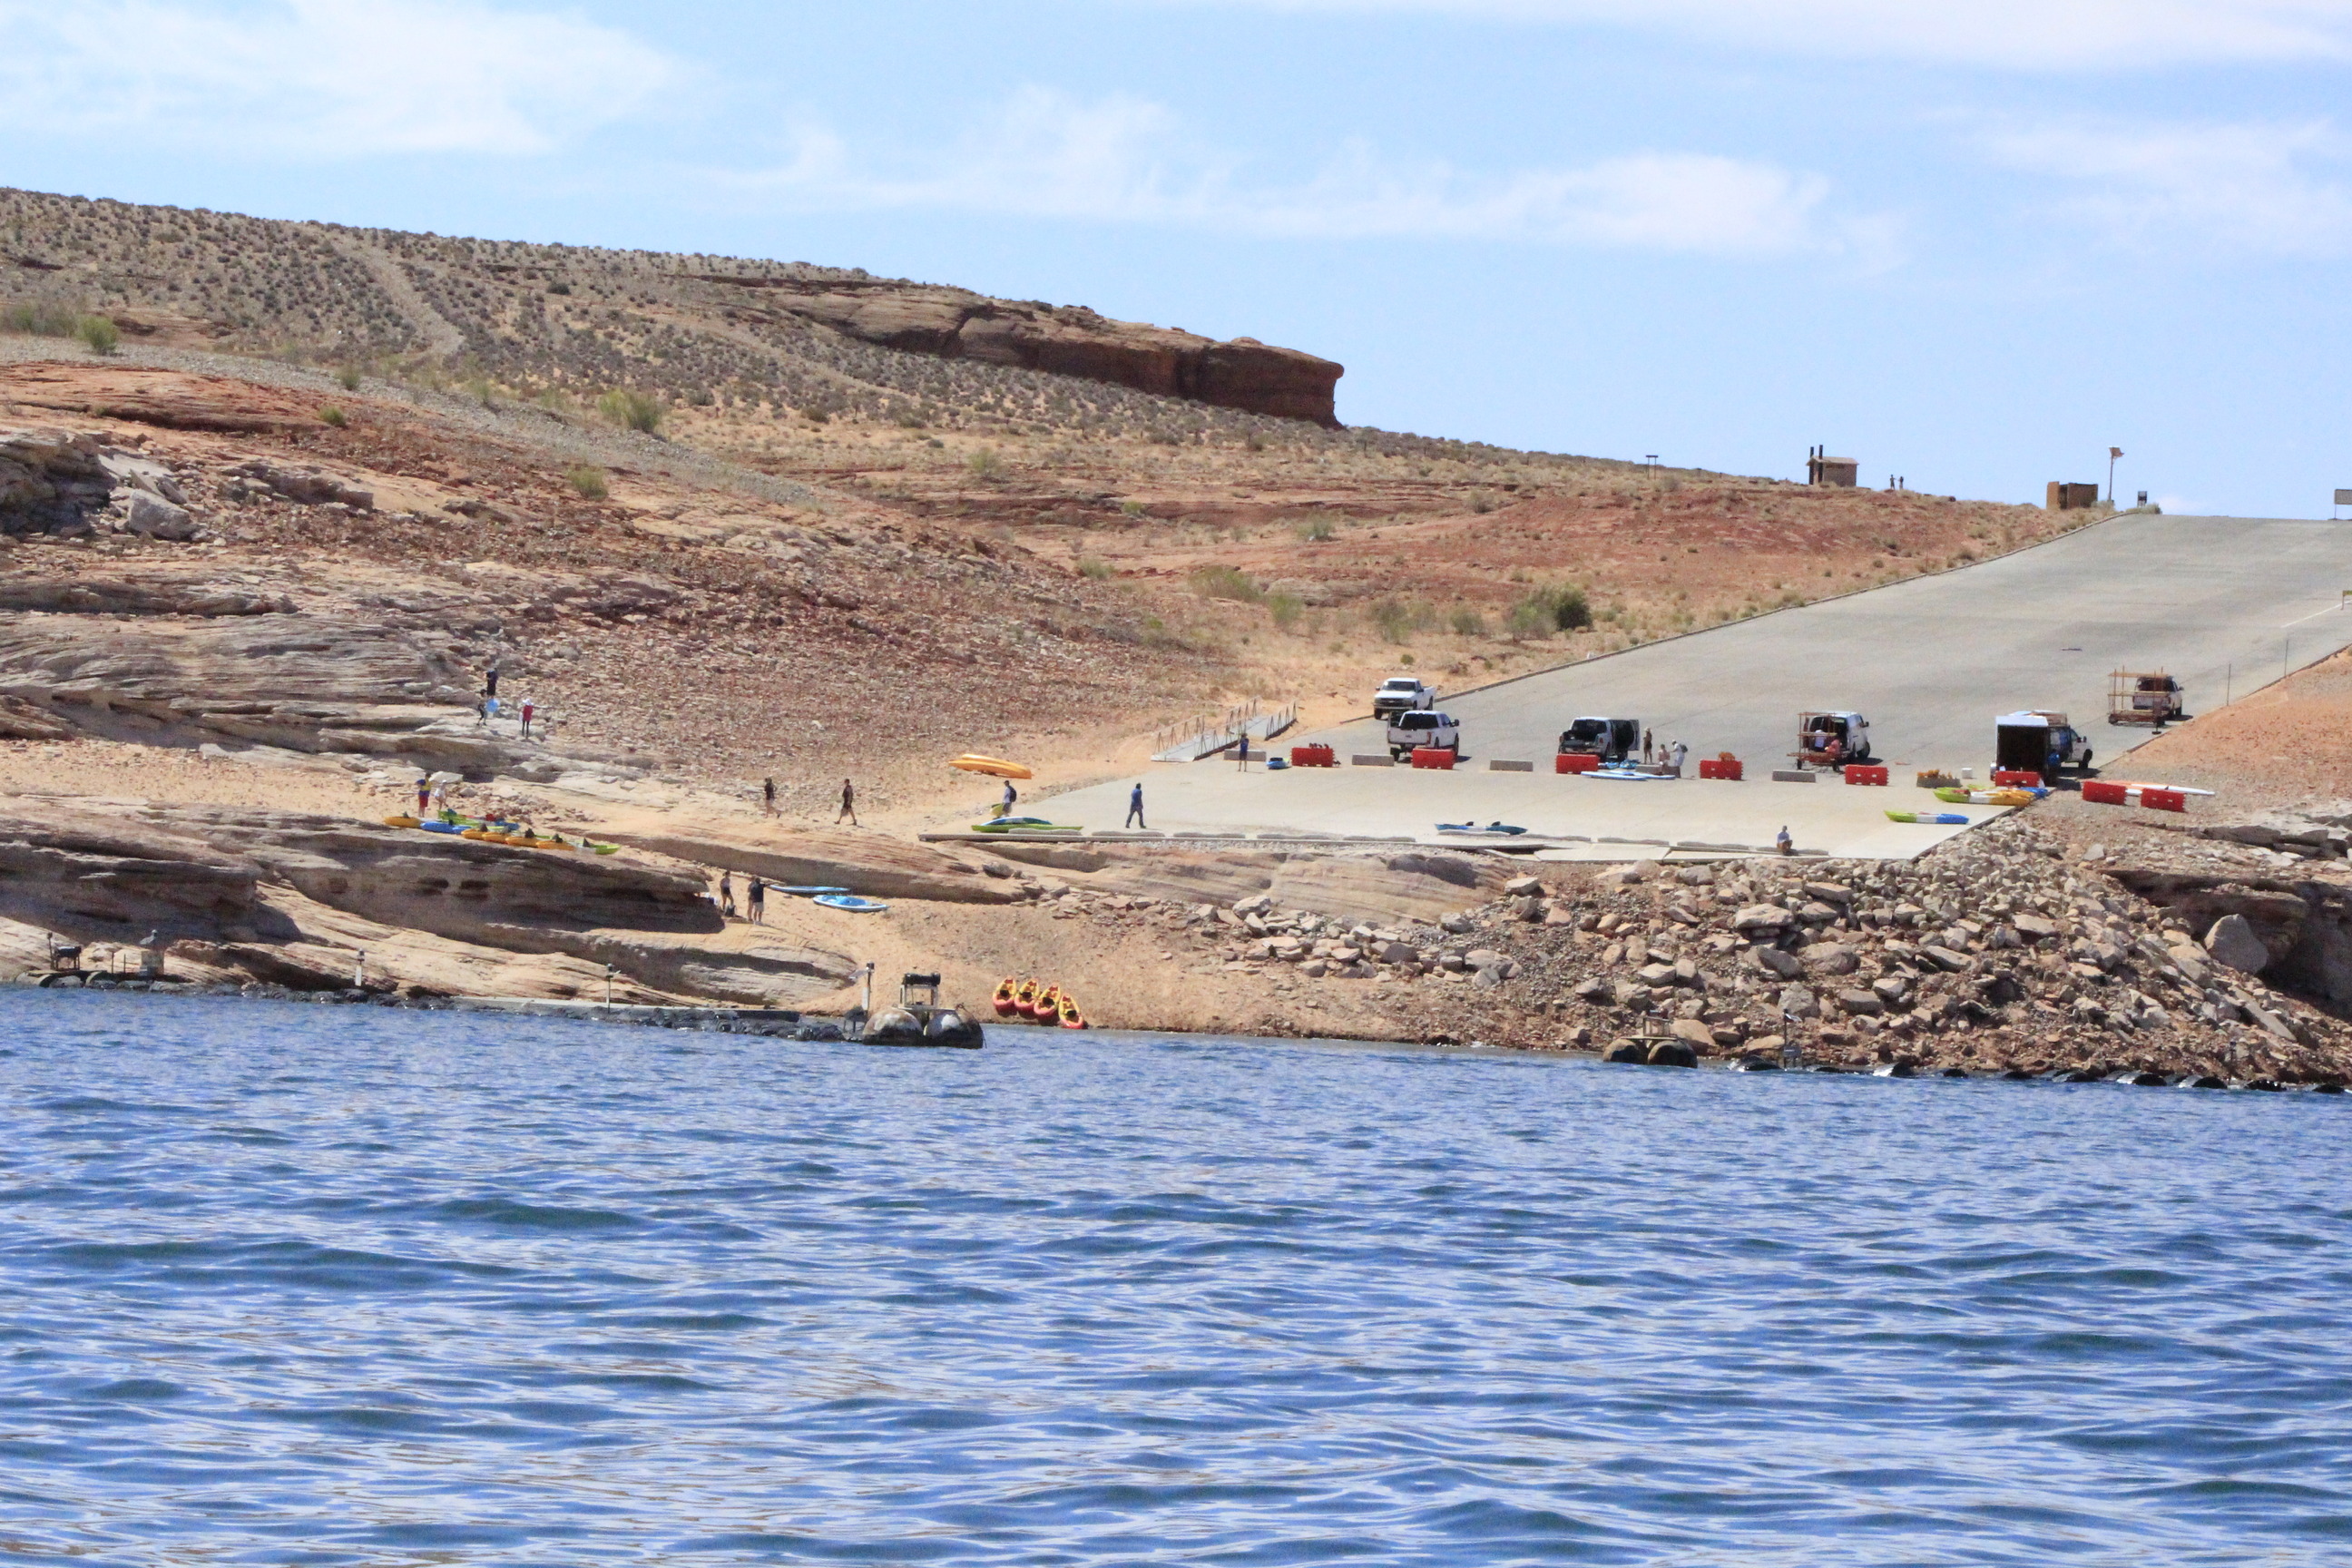 Trucks unloading kayaks on a barricaded launch ramp as visitors descend a rocky shoreline.